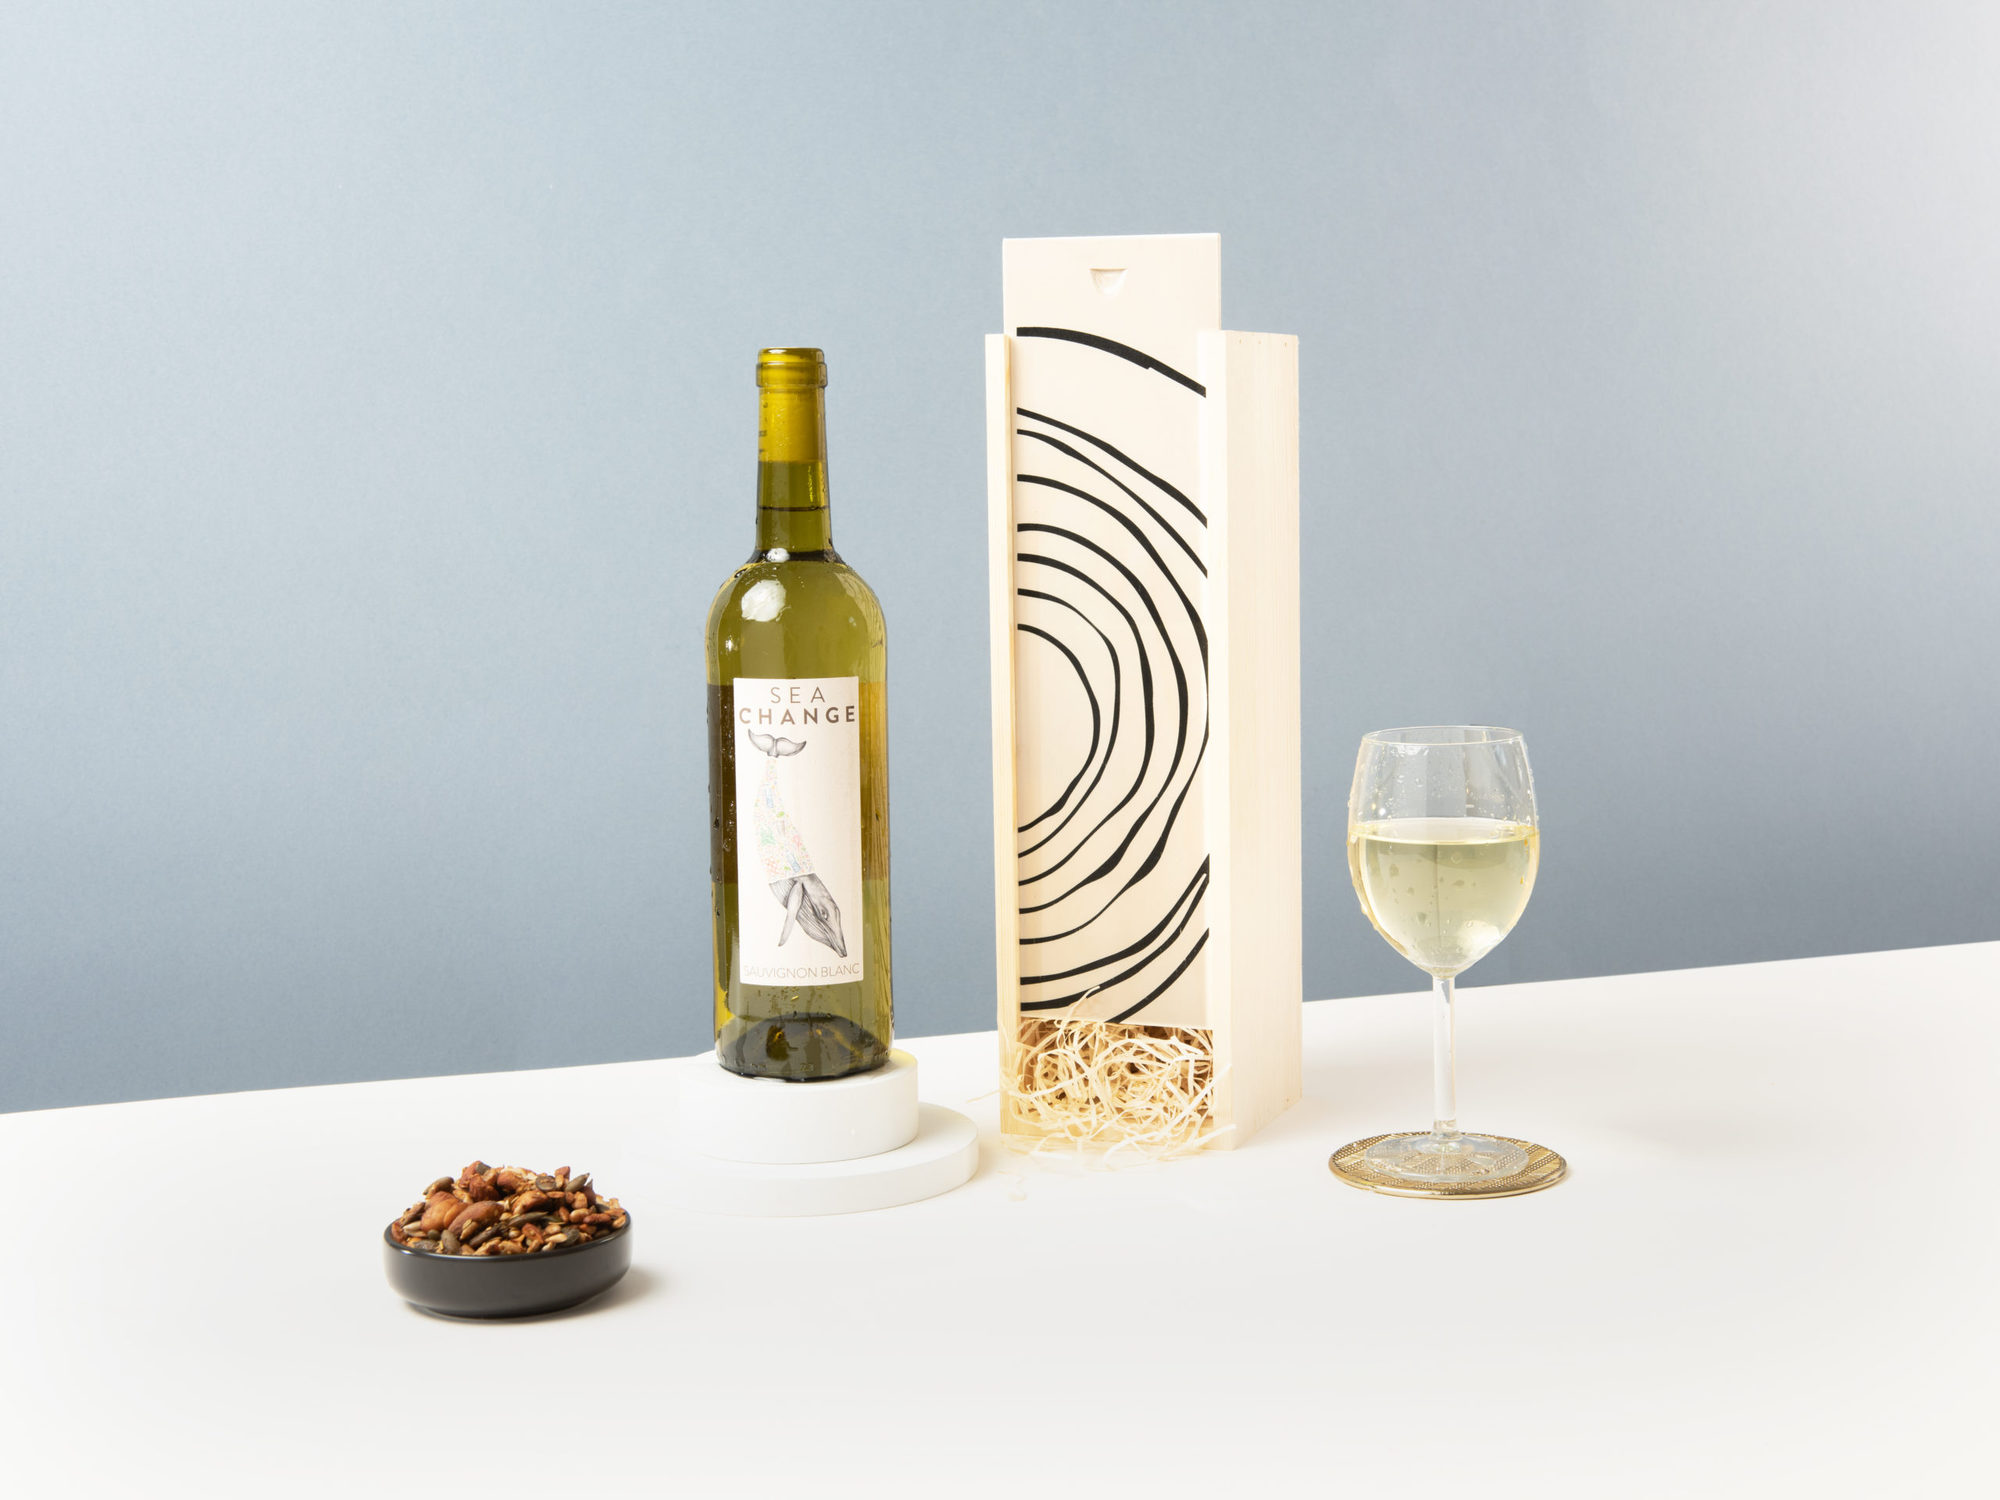 Build Your Own Wine Gift – Single Bottle & Chocolate Gift